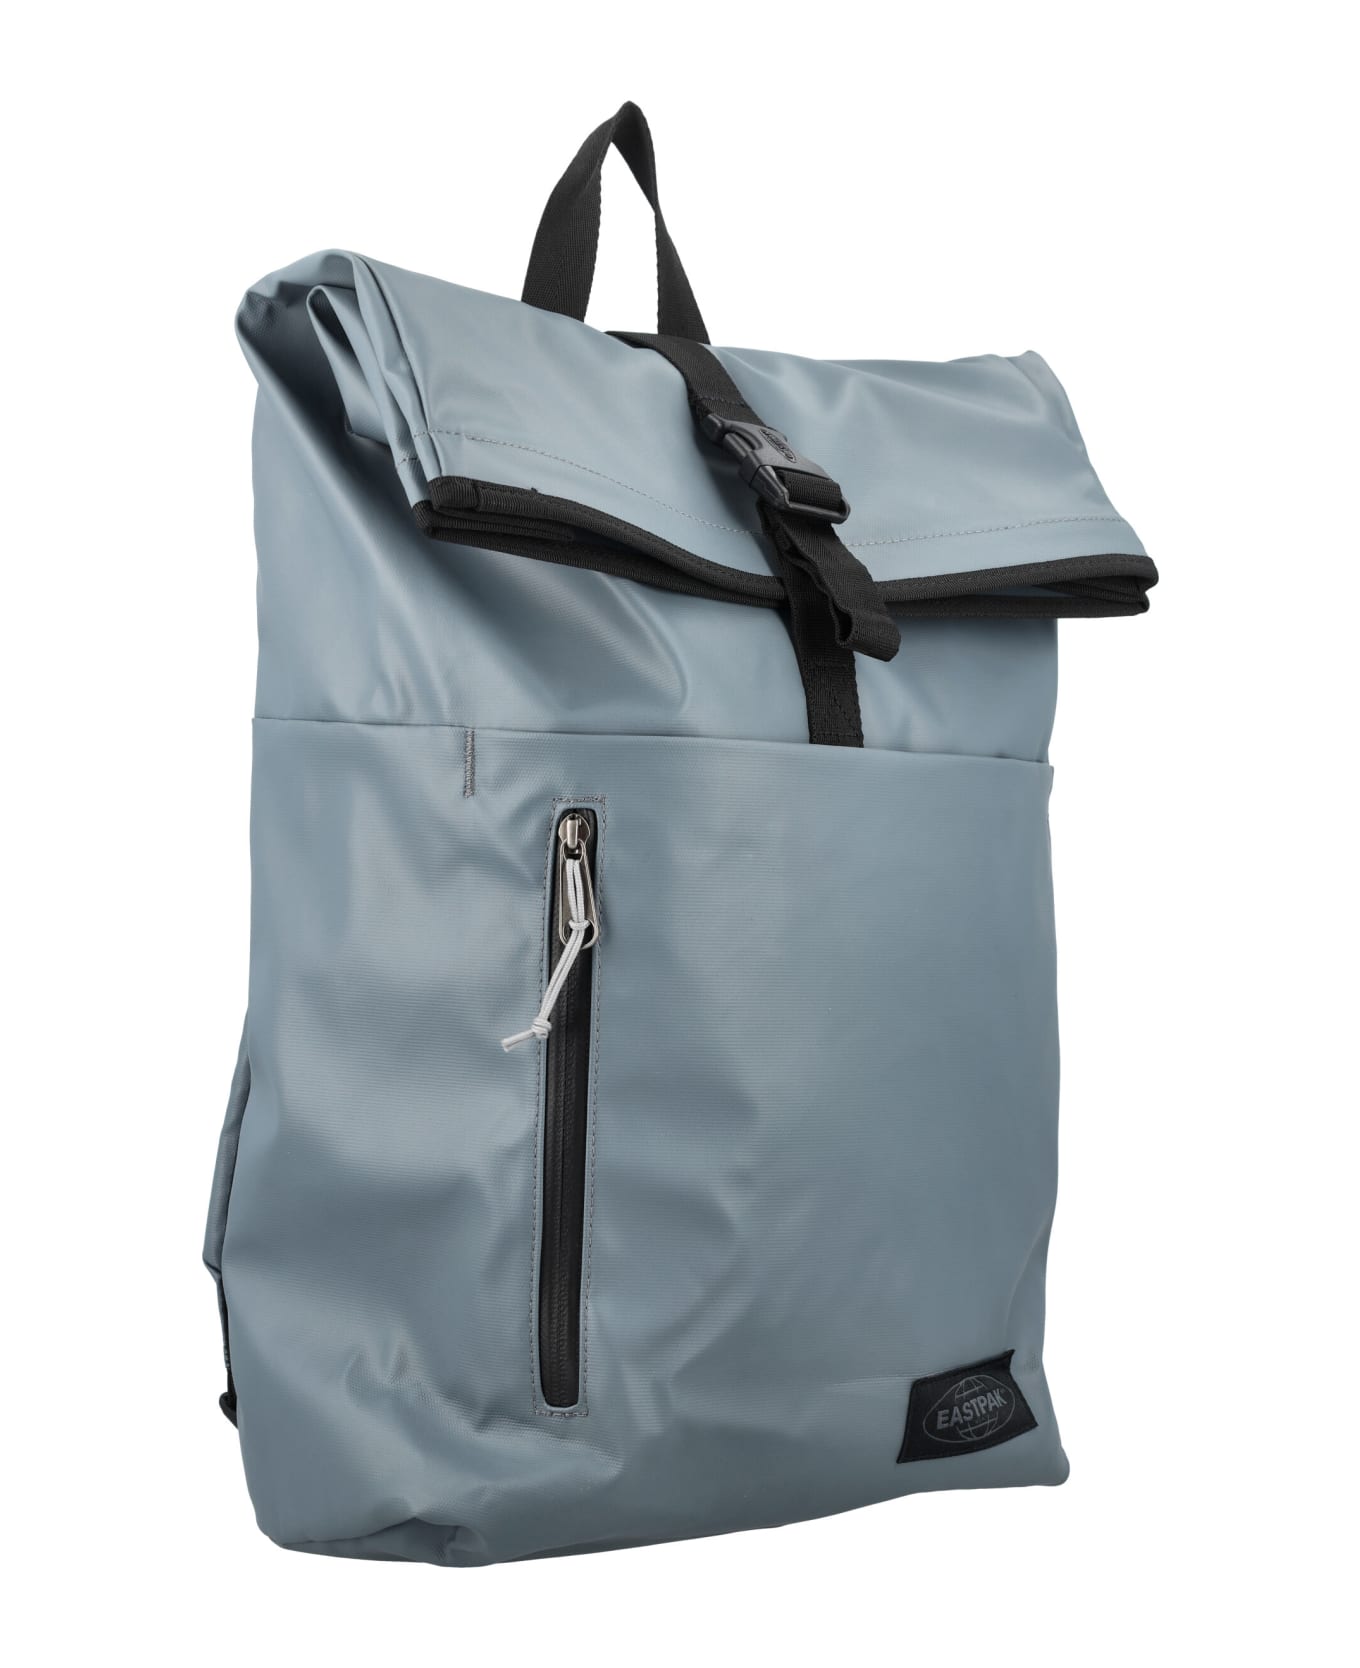 Eastpak Up Roll Tarp Backpack - STORMY バックパック